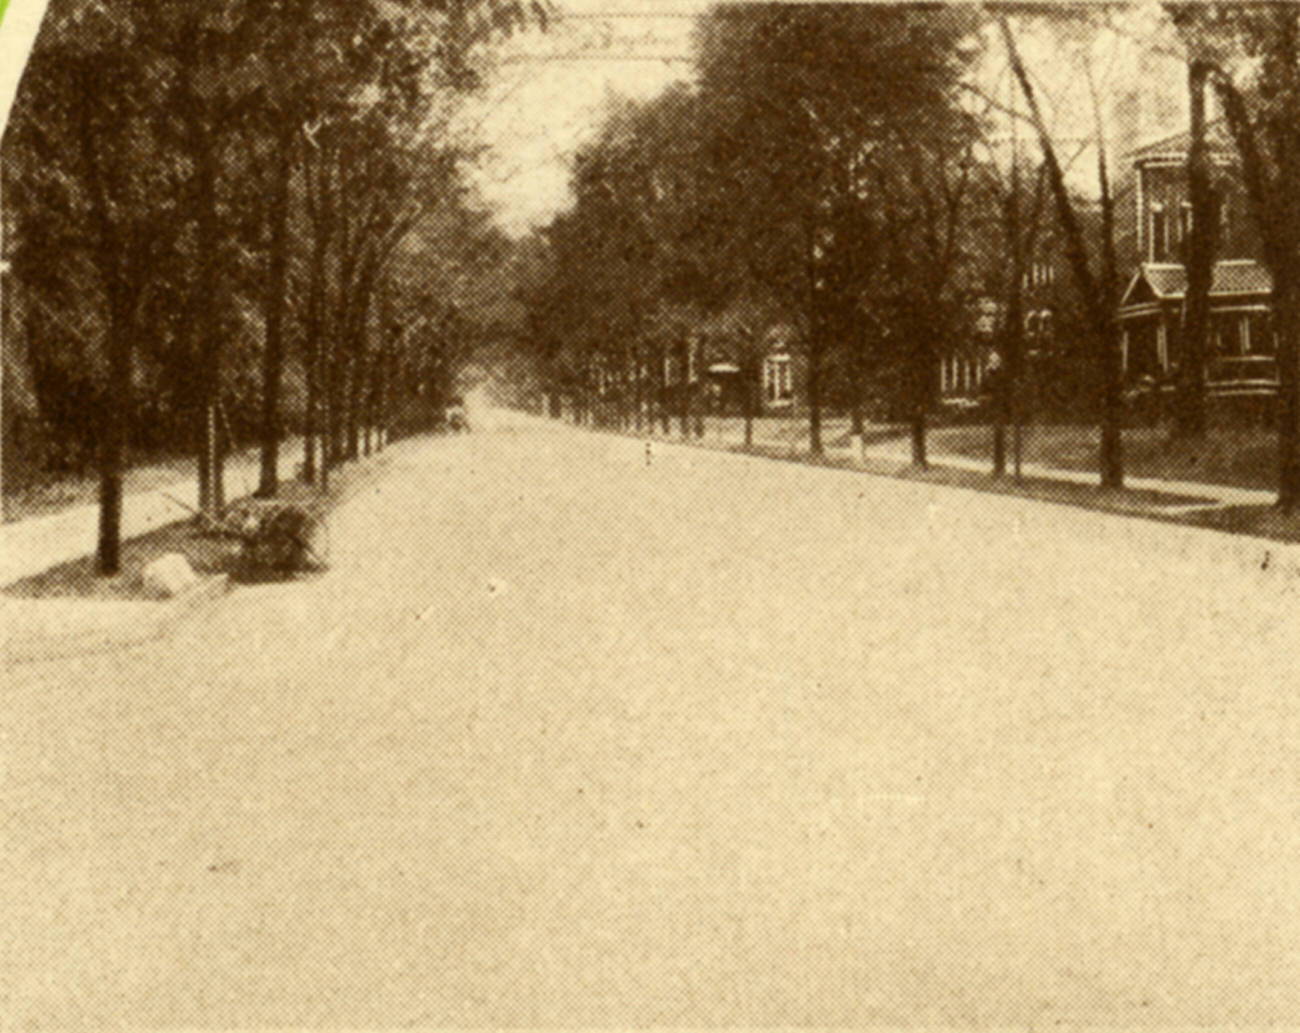 Tree-lined residential stretch of East Broad Street, 1915.